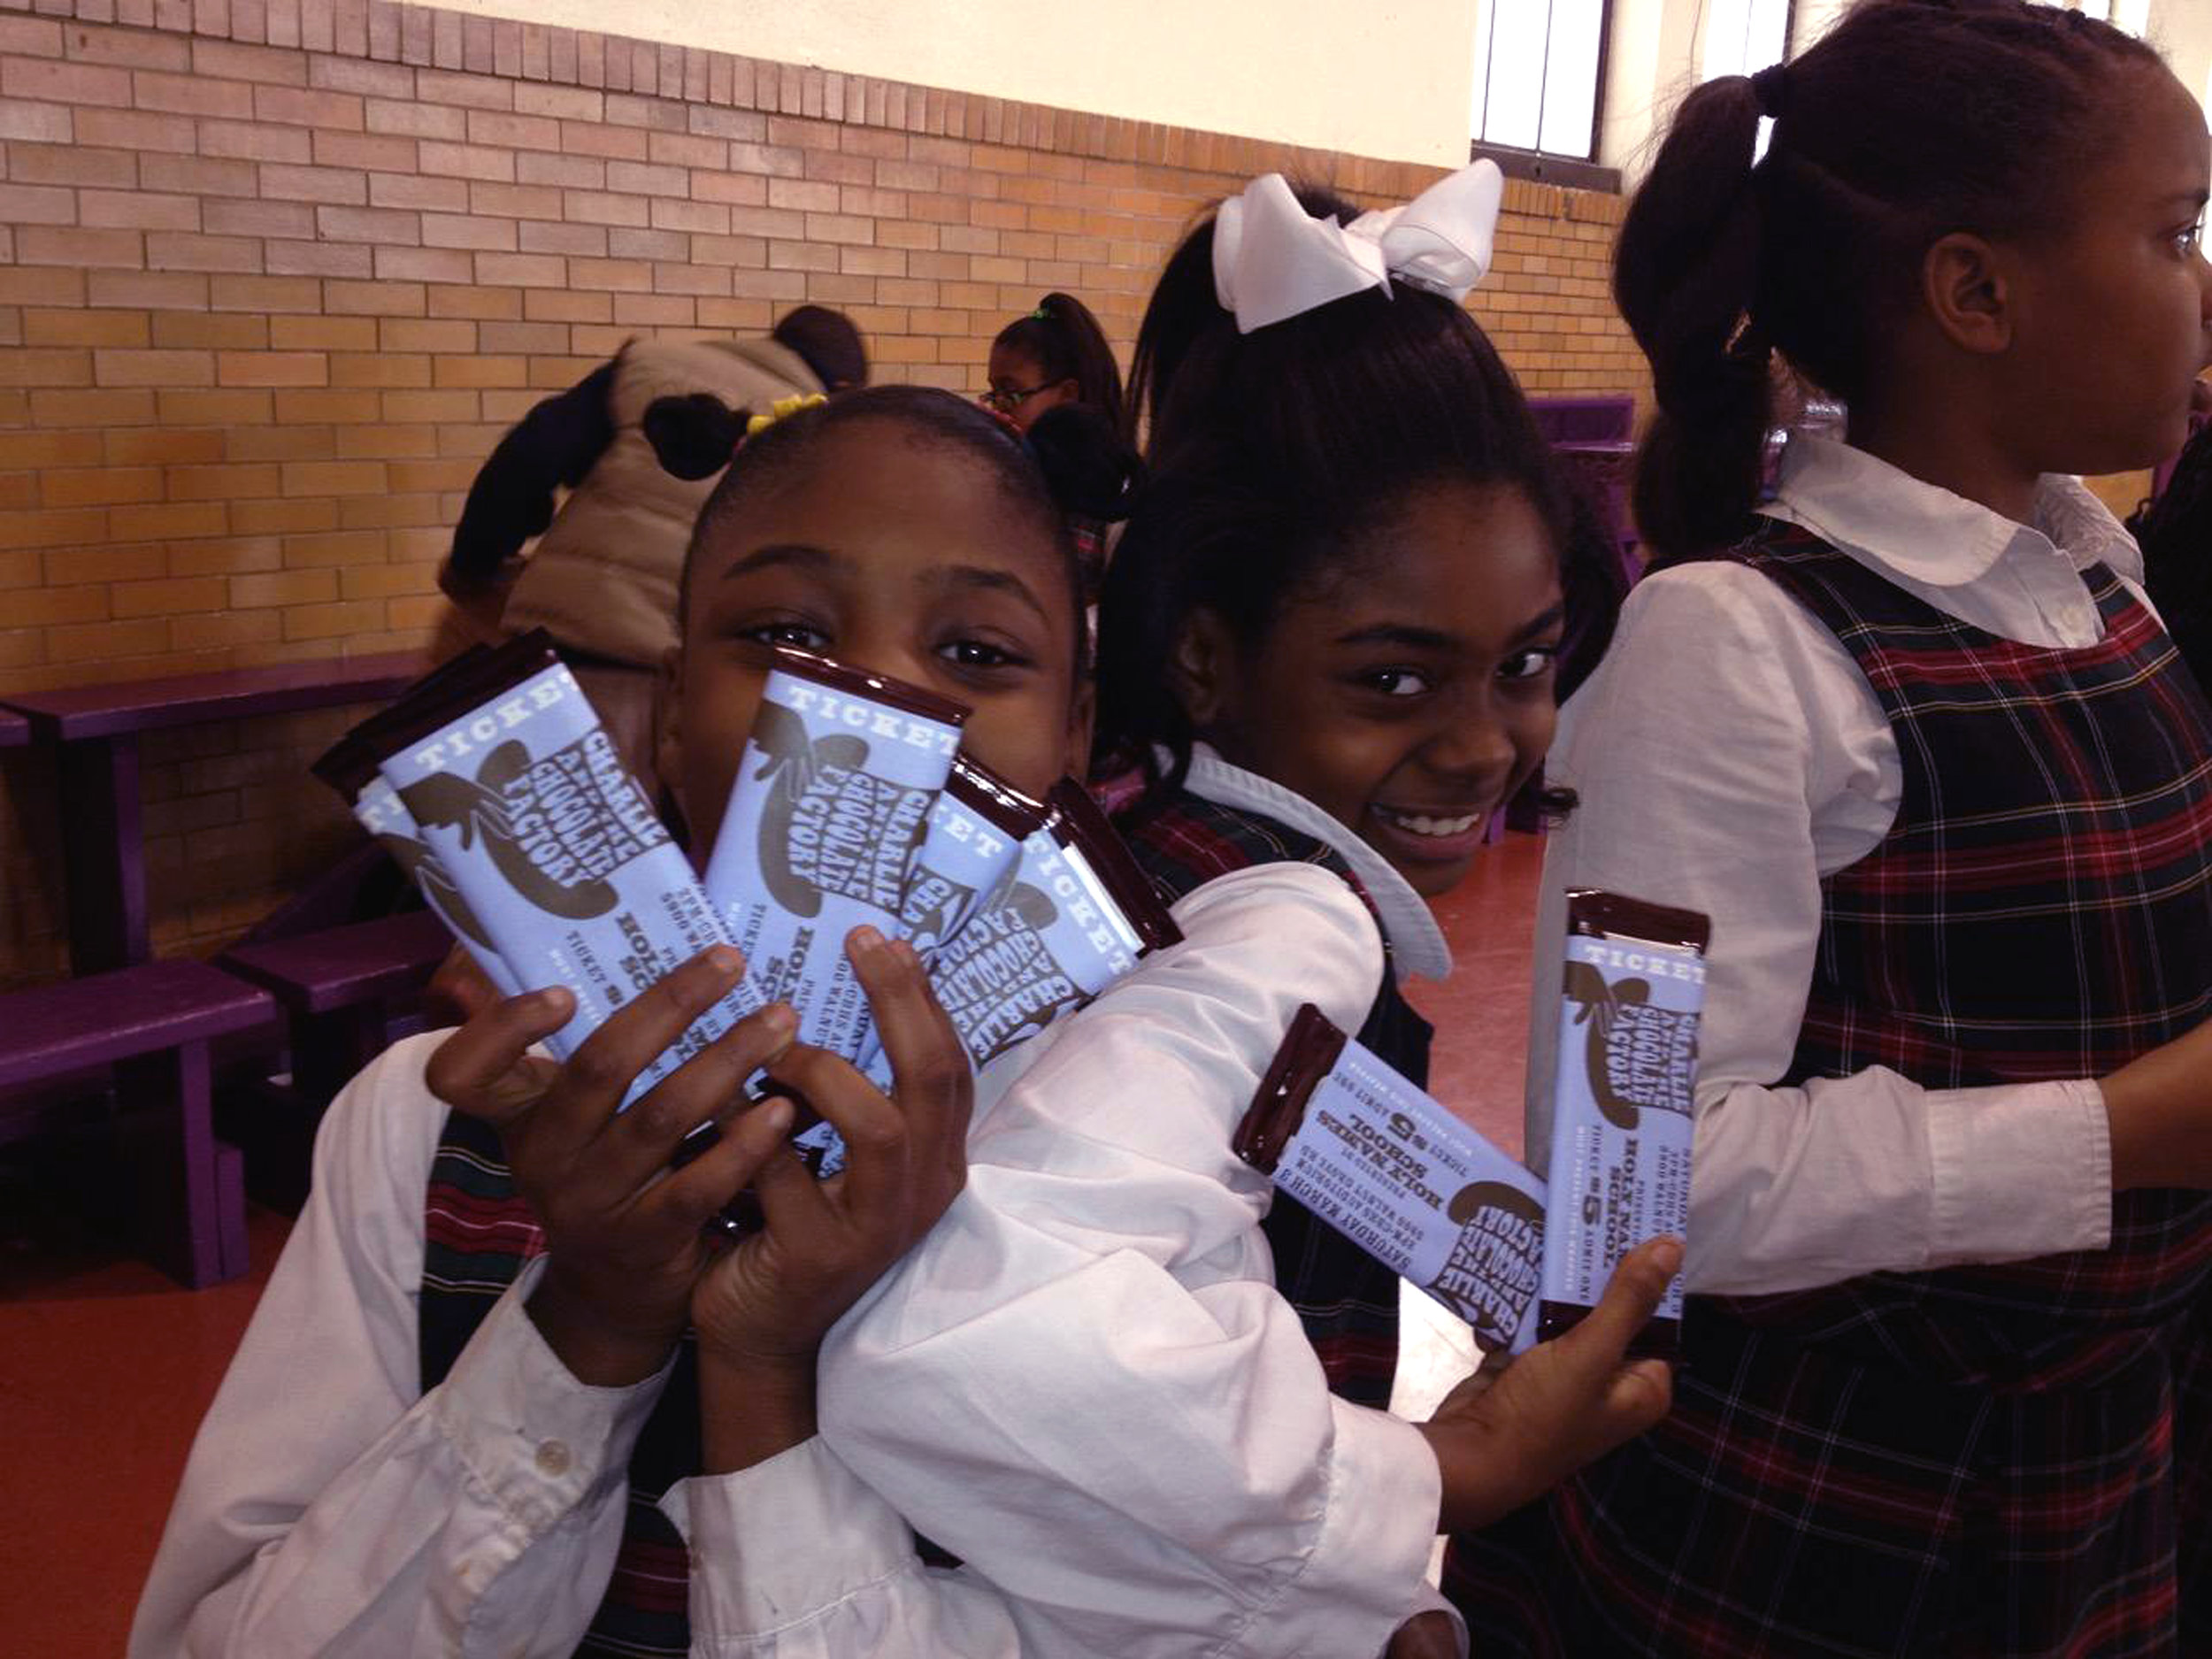  Students selling tickets that were wrapped around chocolate bars.  Photo courtesy Holy Names Jubilee School  Branding creative, copywriting and design by Chuck Mitchell  Pro bono work developed for Holy Names Jubilee School’s production of Charlie a